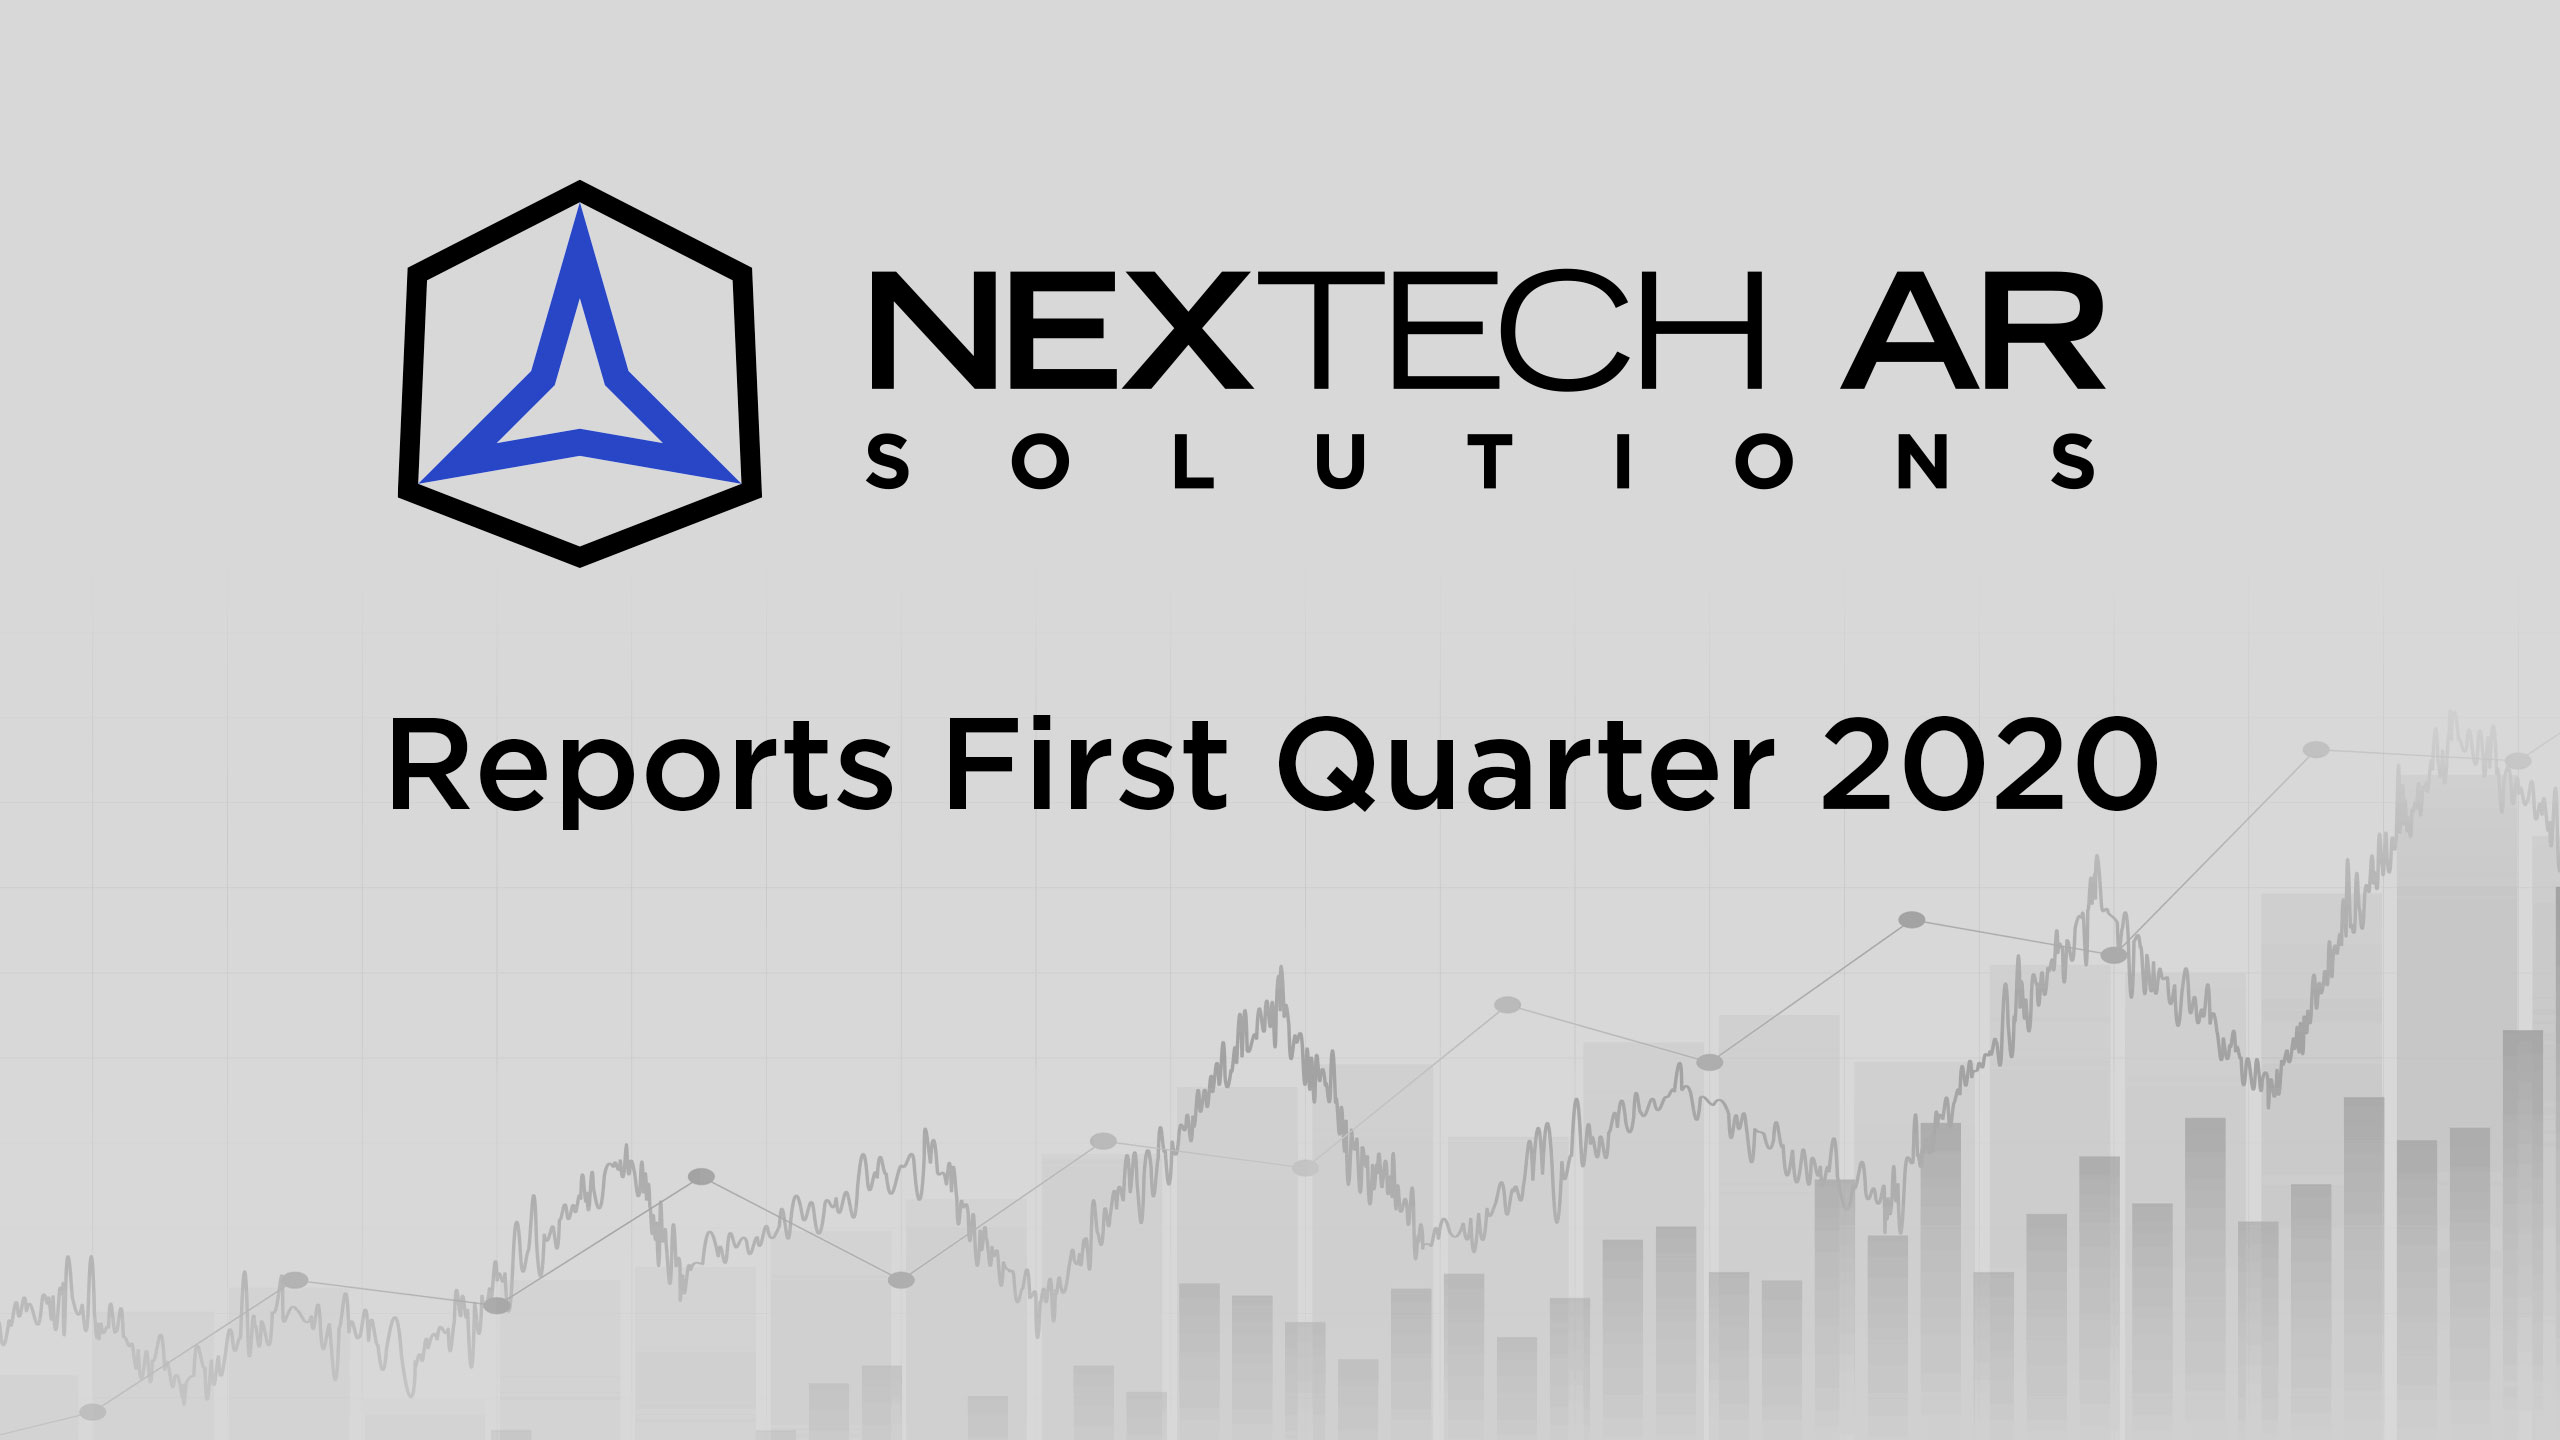 Nextech AR Solutions Reports First Quarter 2020 Results